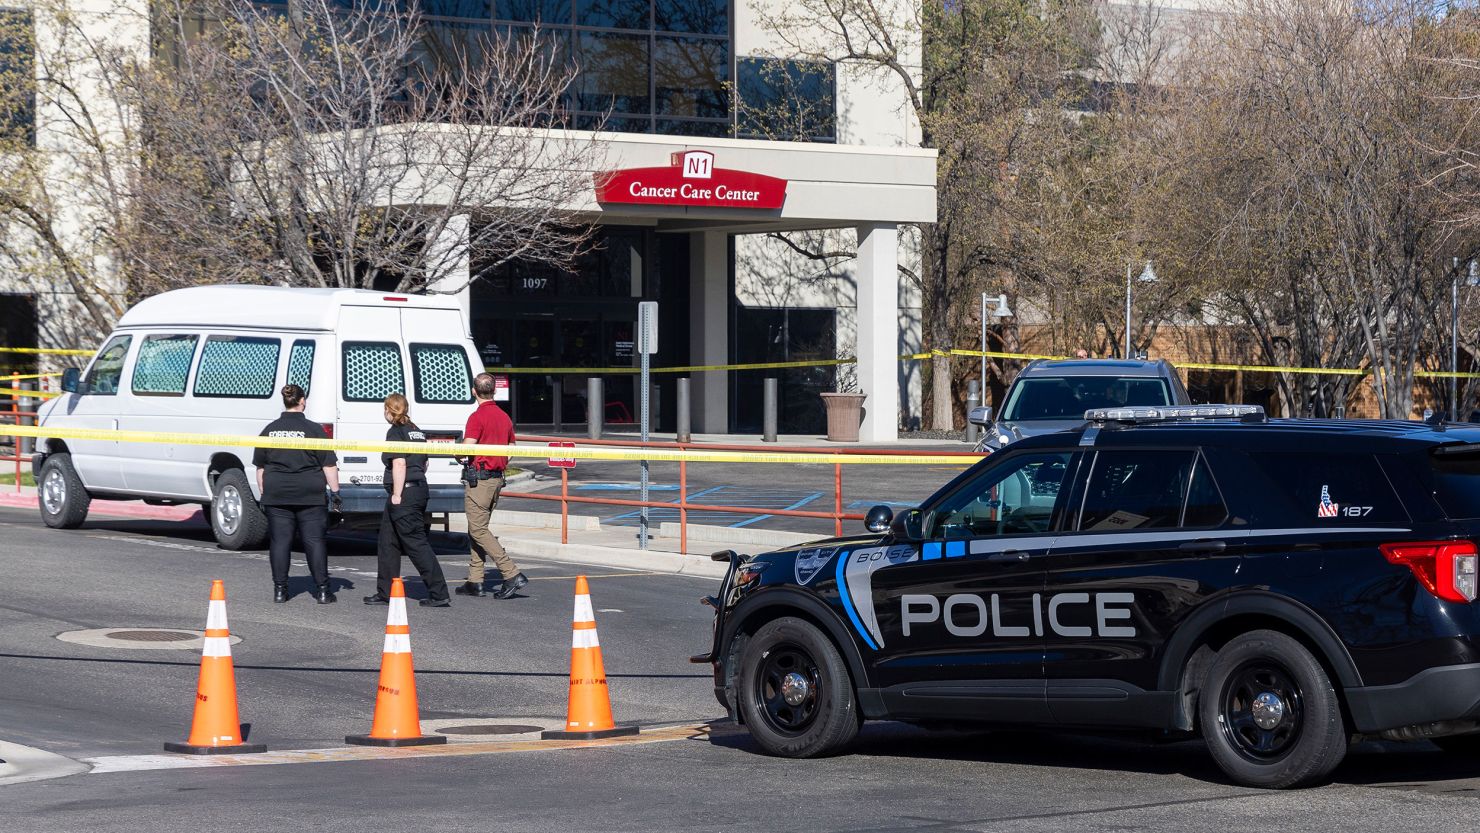 The attack happened just outside the hospital's emergency department.